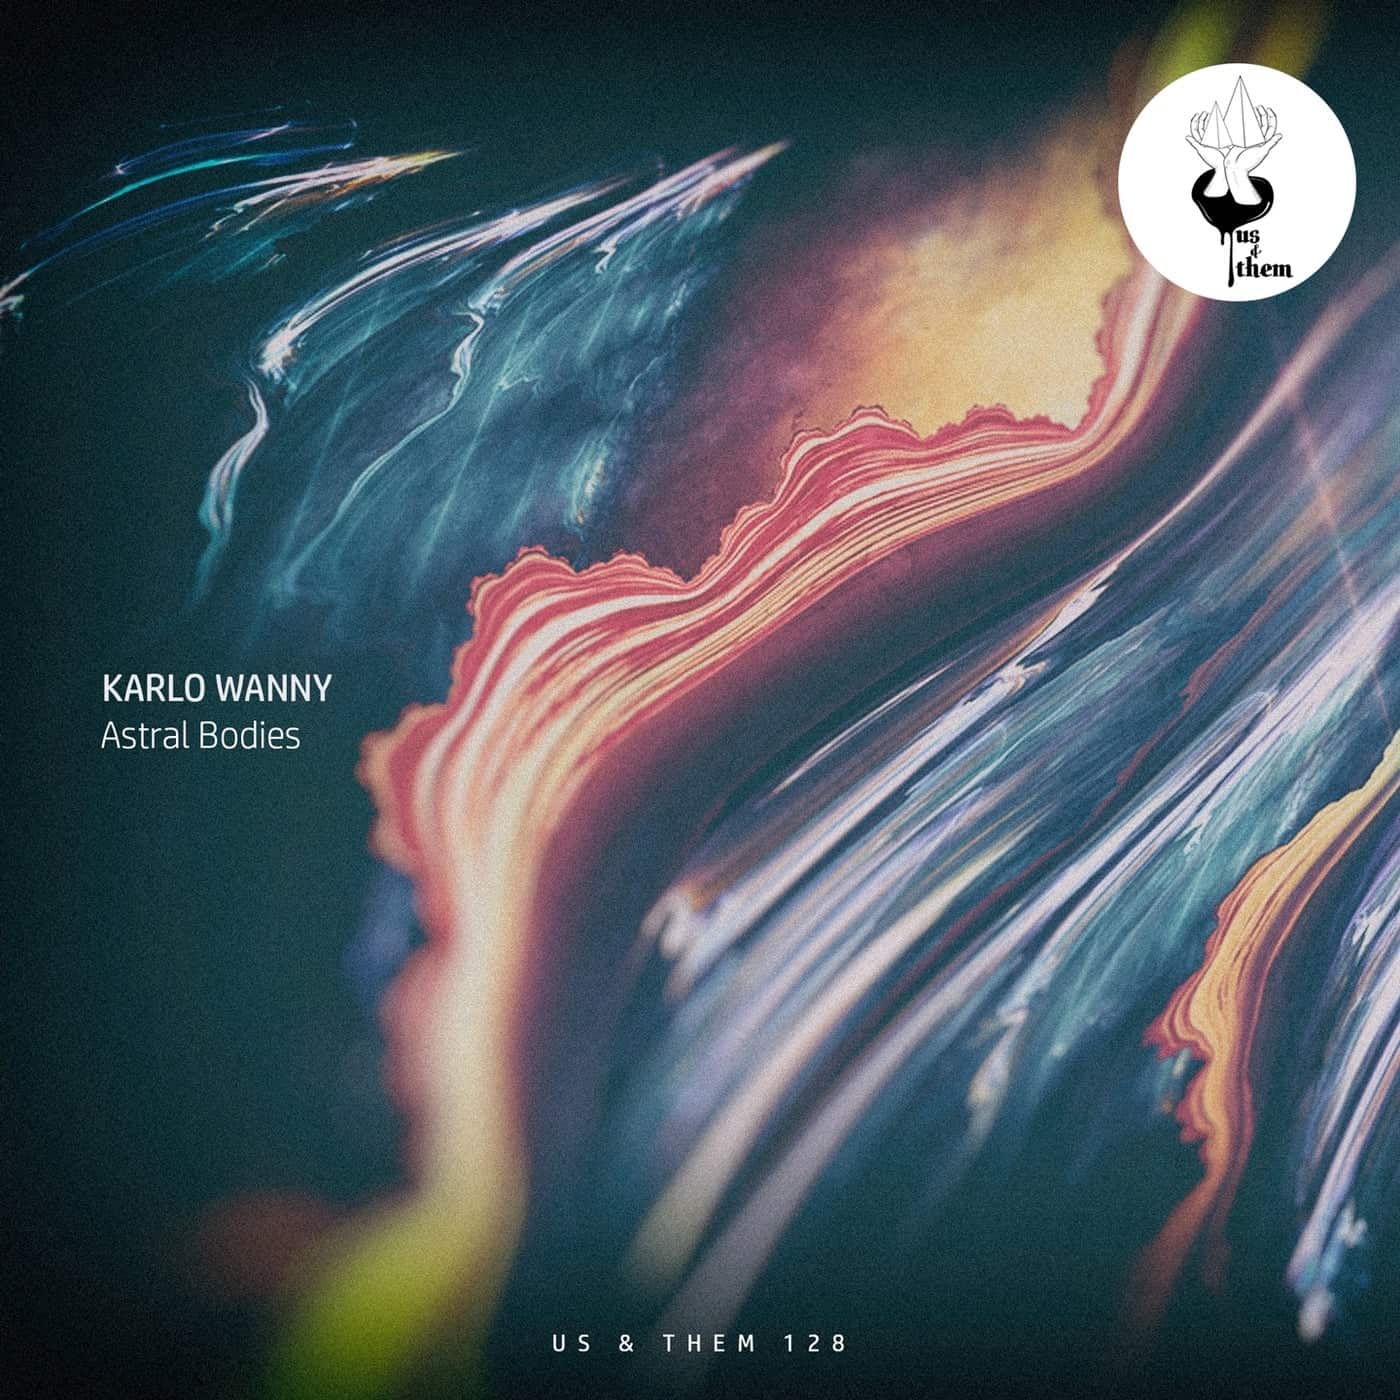 image cover: Nix, Karlo Wanny - Astral Bodies / UT128